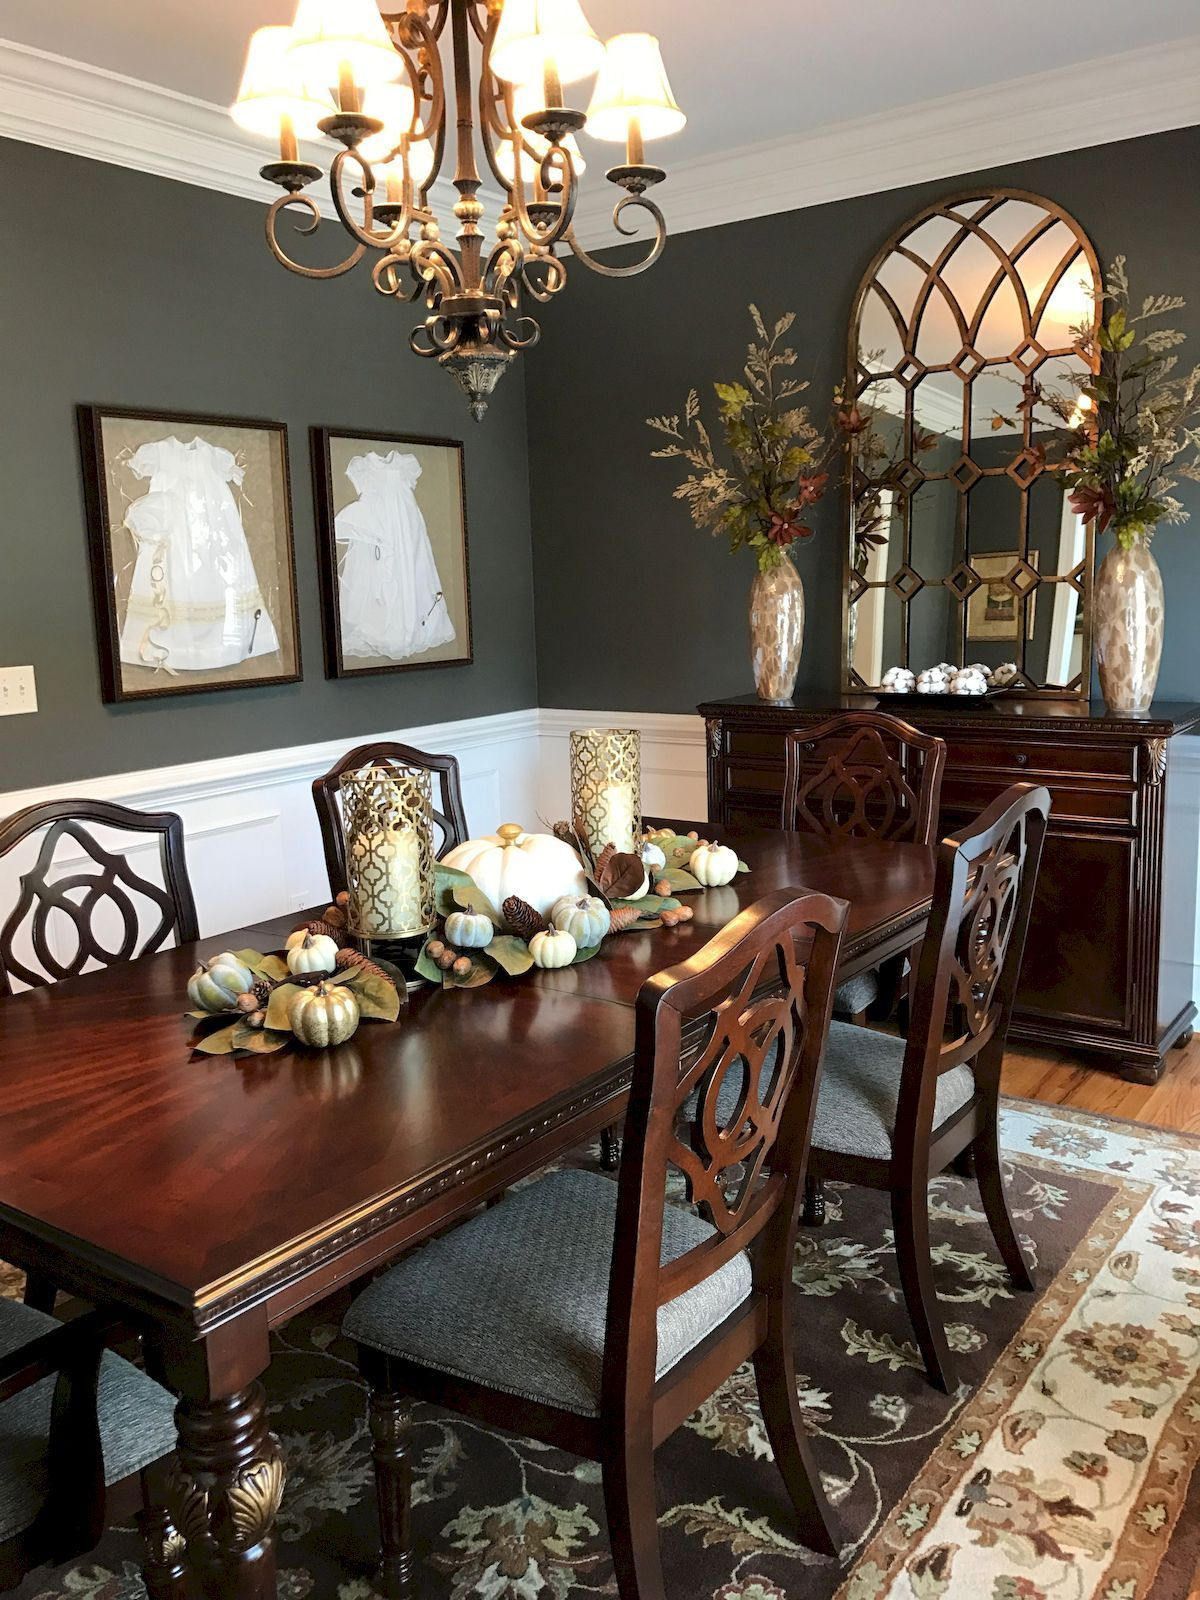 47 The Best Small Dining Room Design Ideas That You Can Try in Your ...
 Dining Room Design Pictures